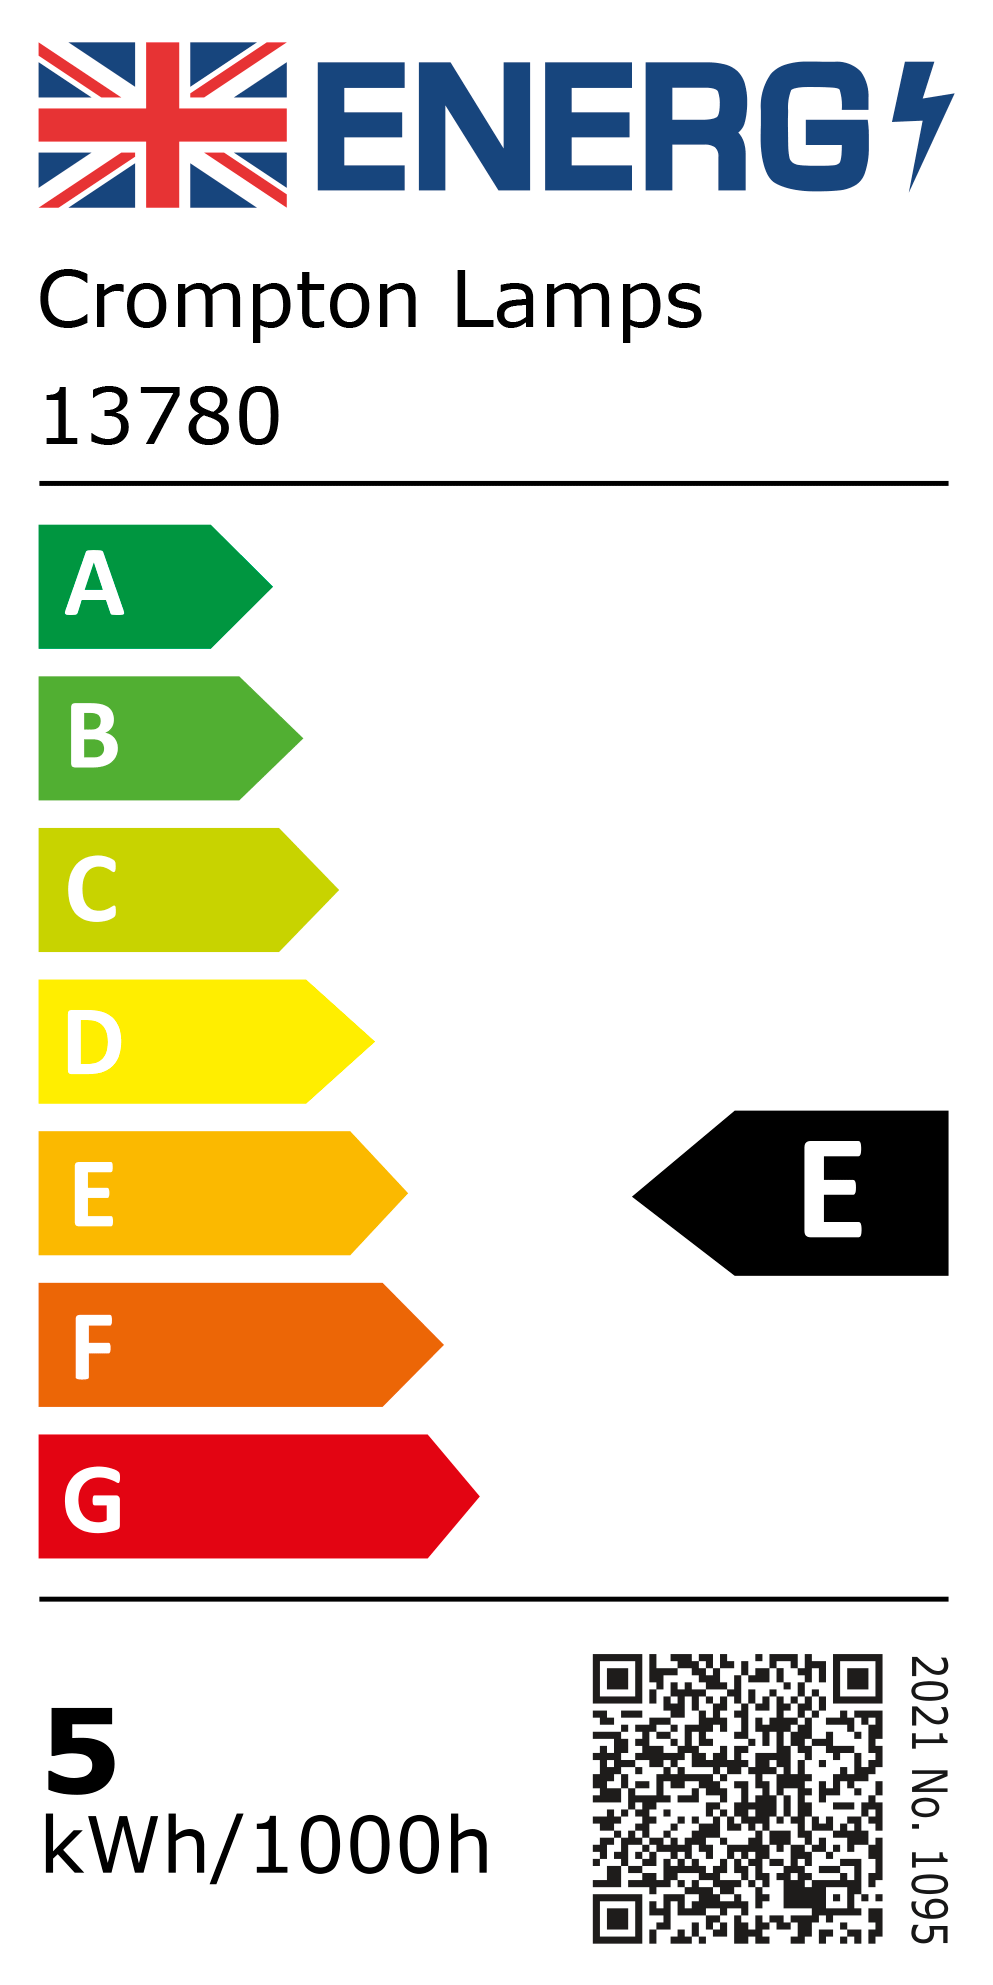 New 2021 Energy Rating Label: Stock Code 13780